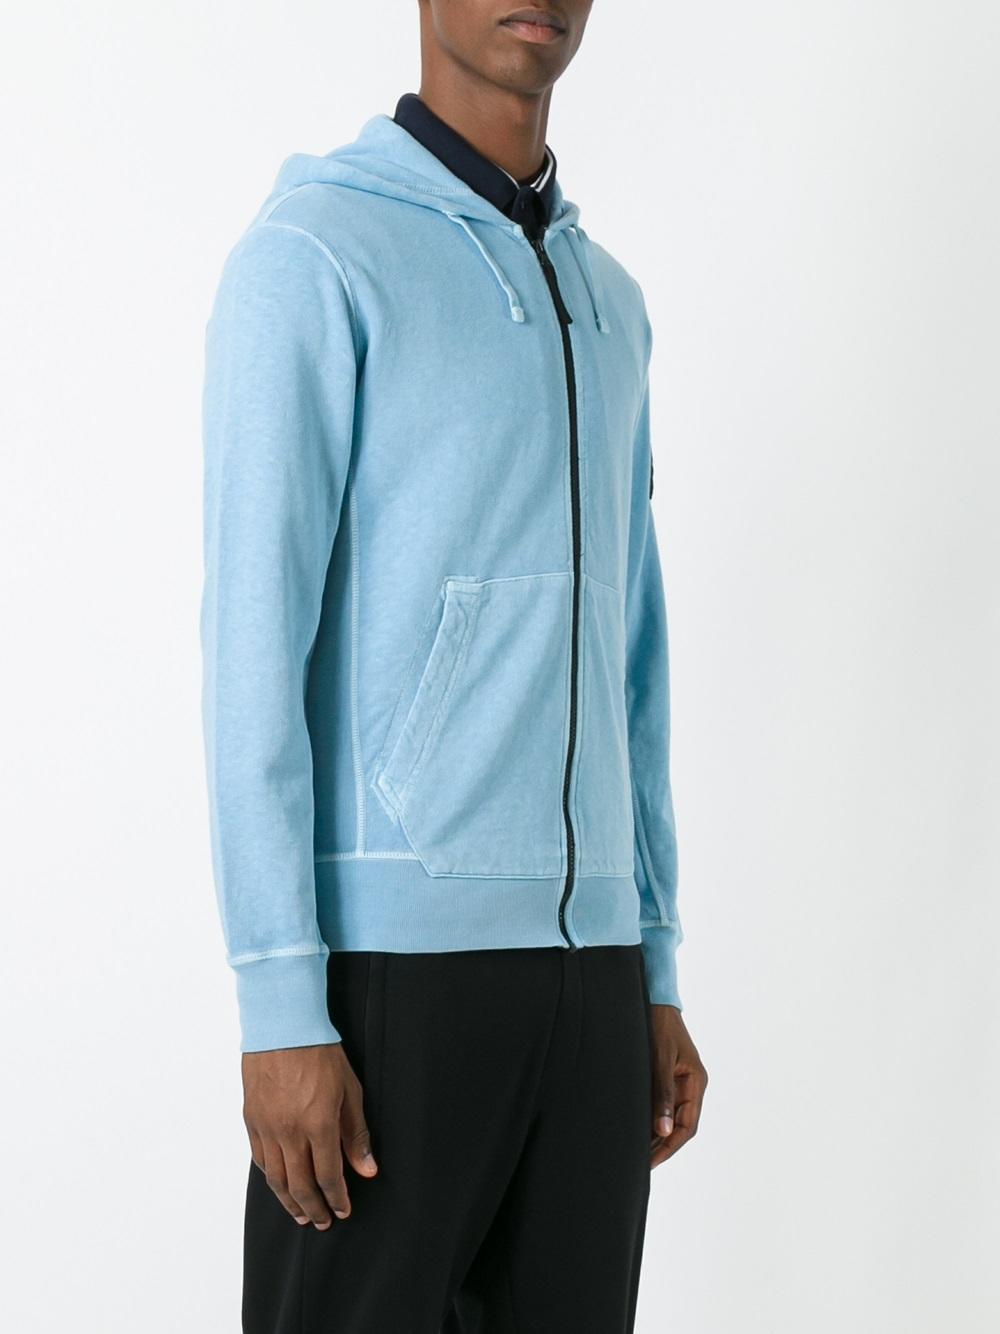 Stone Island Cotton Zip Up Hoodie in Blue for Men - Lyst